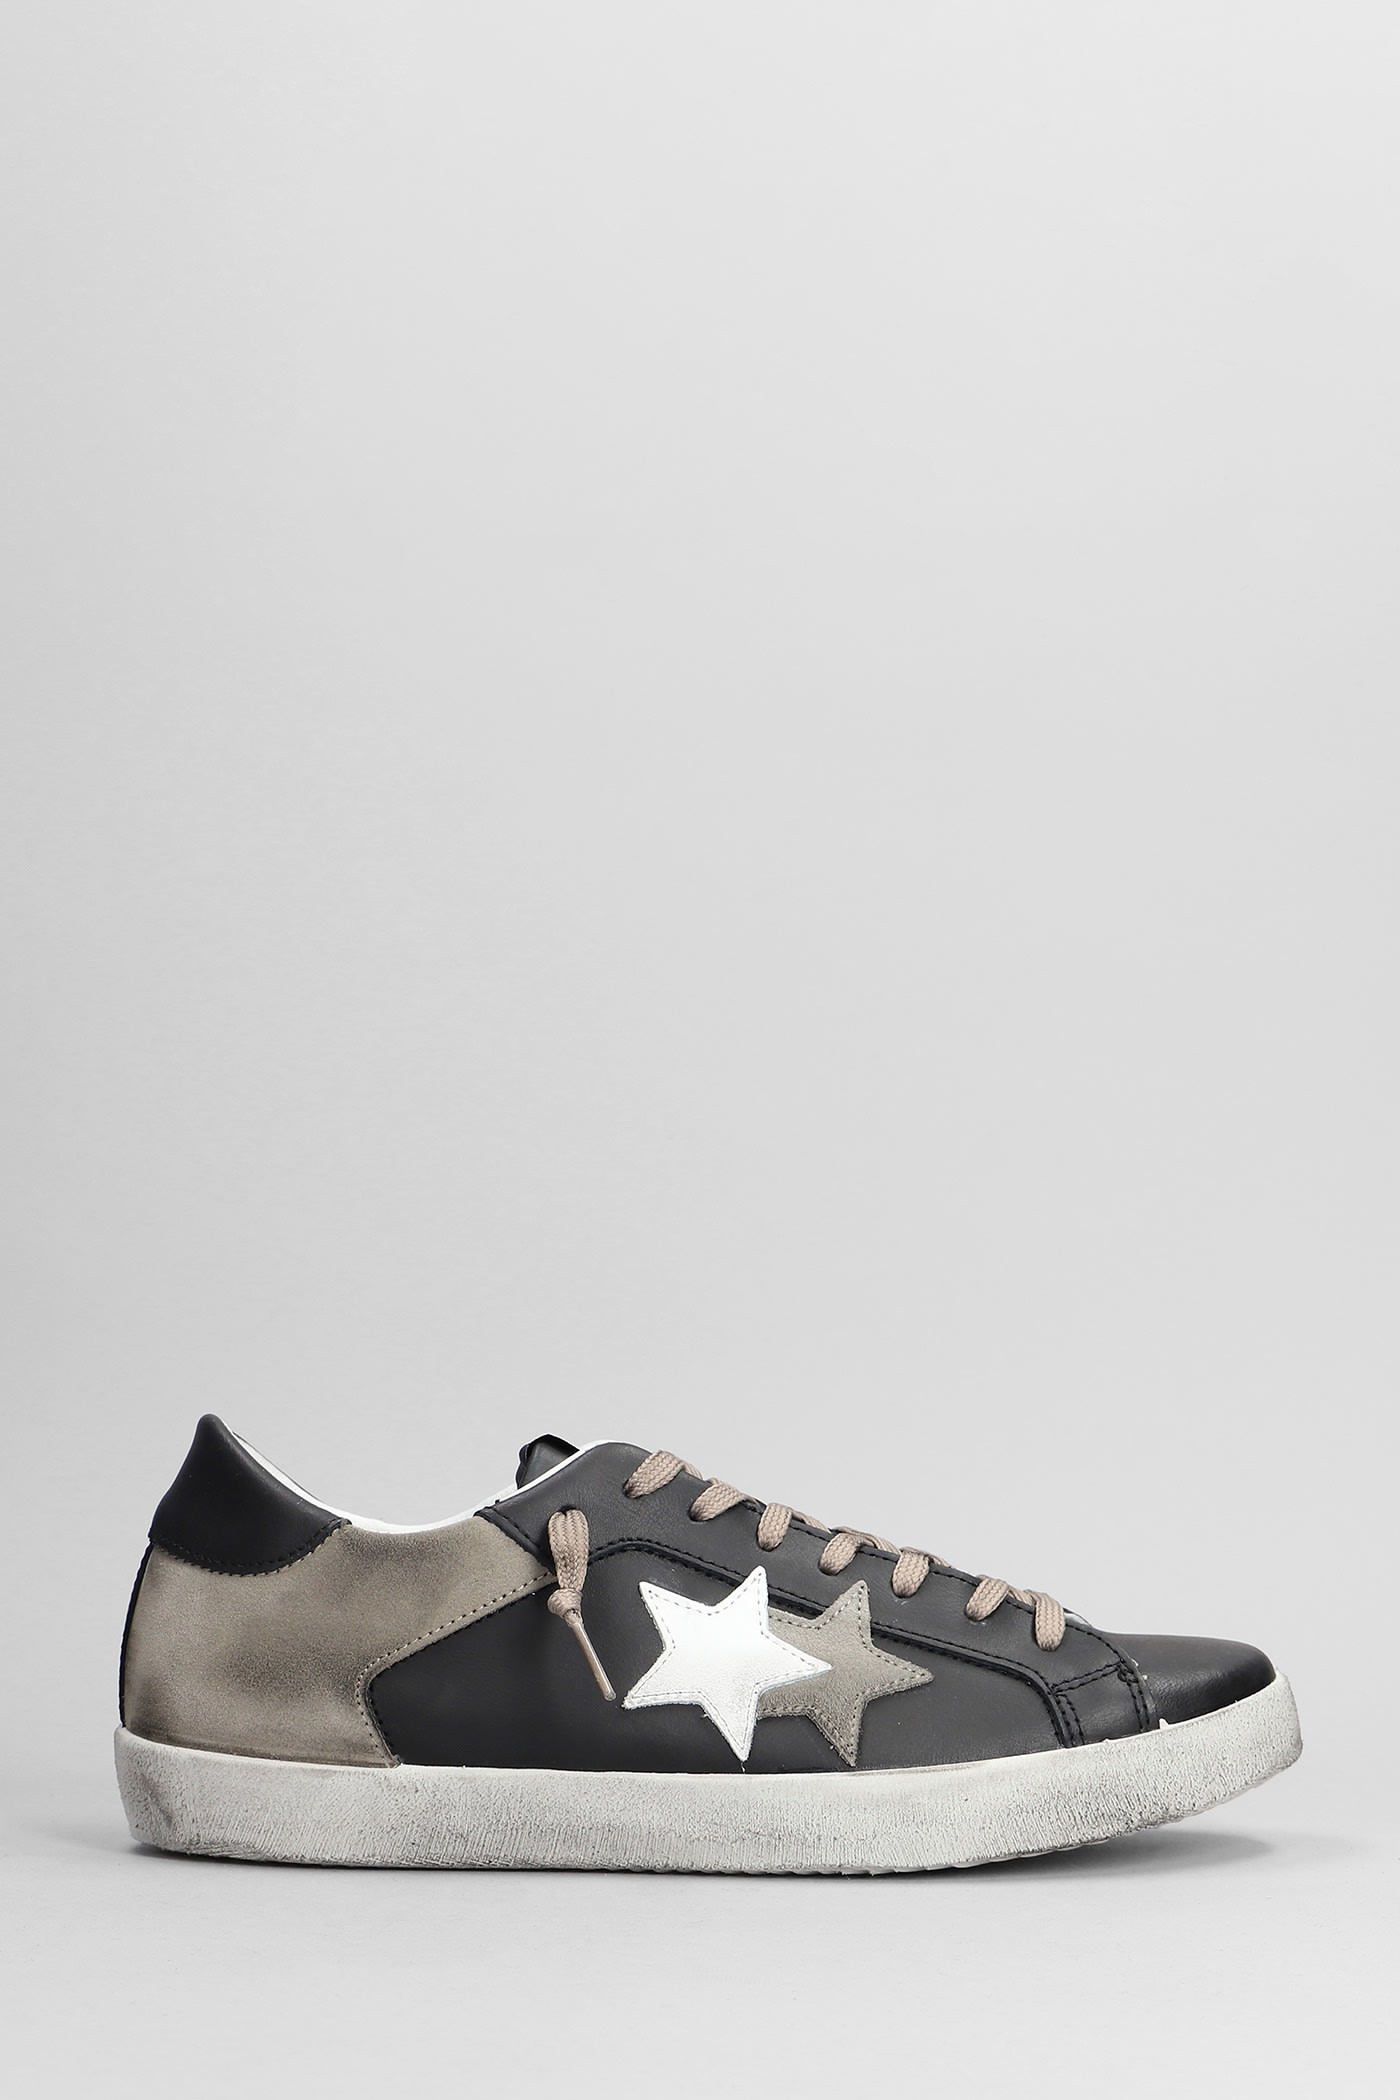 2star Sneakers In Black Suede And Leather